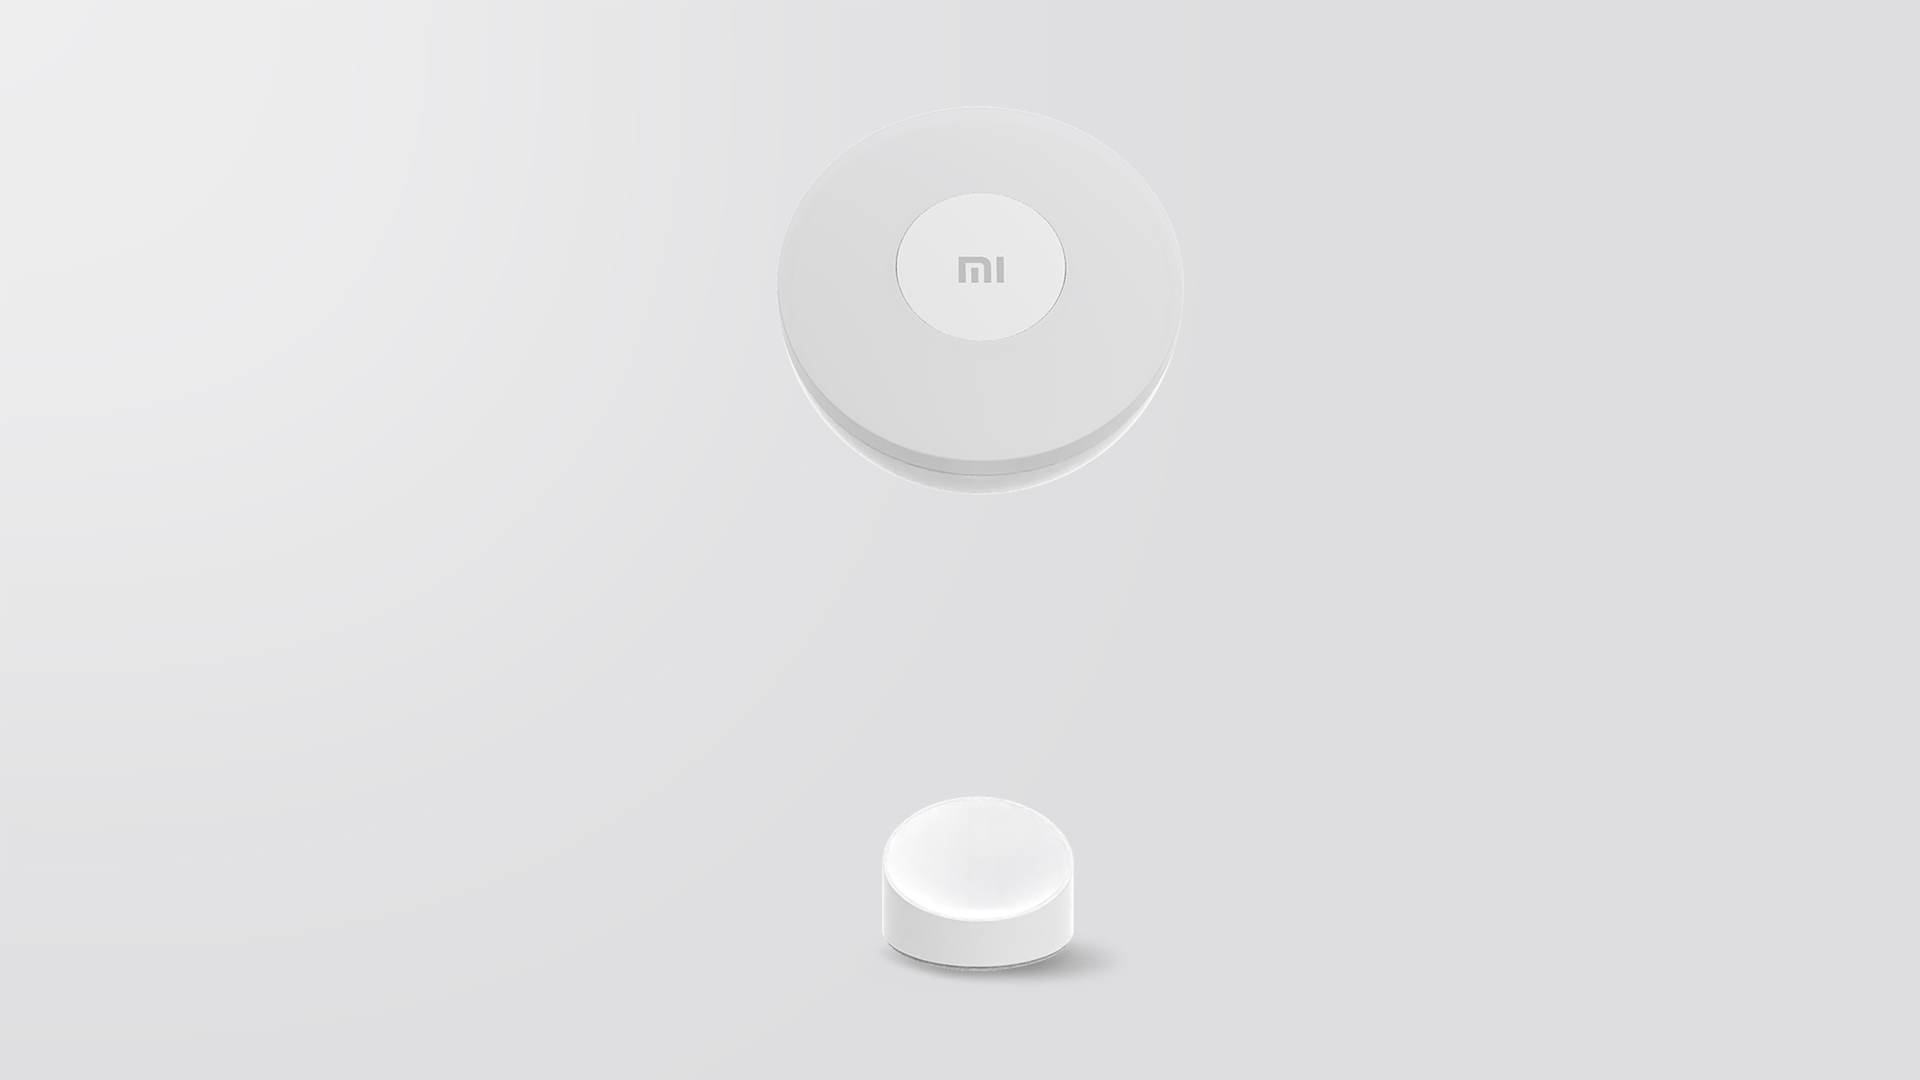 Xiaomi motion activated night light. Ночник Xiaomi Motion-activated Night Light 2. Xiaomi mi Motion-activated Night Light 2 mjyd02yl (mue4115gl). Xiaomi Mijia Night Light 2 mjyd02yl. Ночник Xiaomi Mijia Night Light 2.